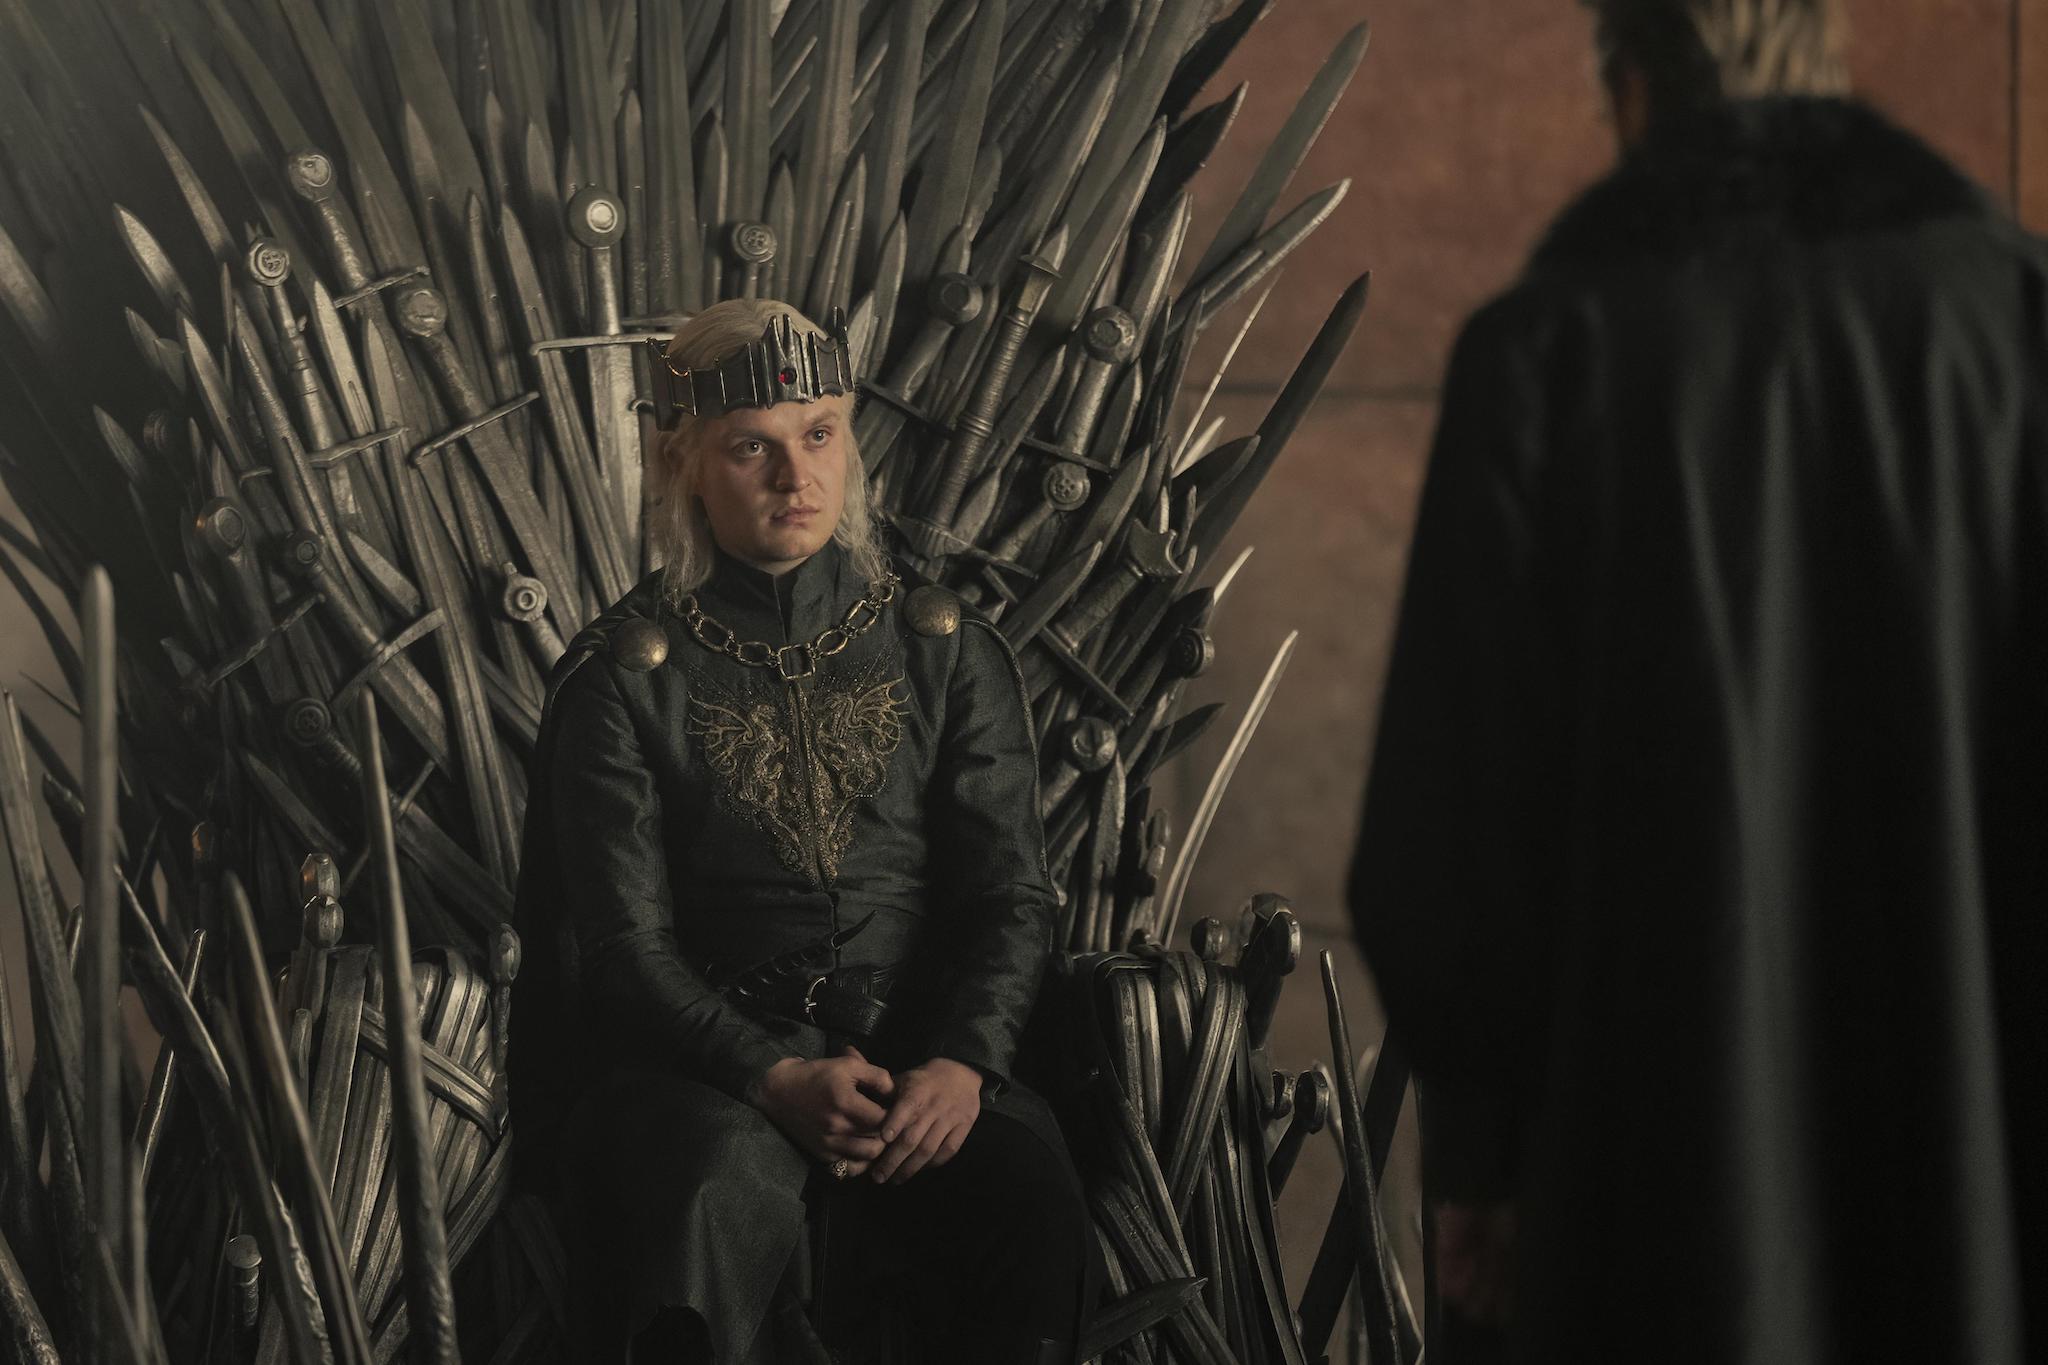 Aegon II Targaryen’s seat on the Iron Throne grows more precarious by the second